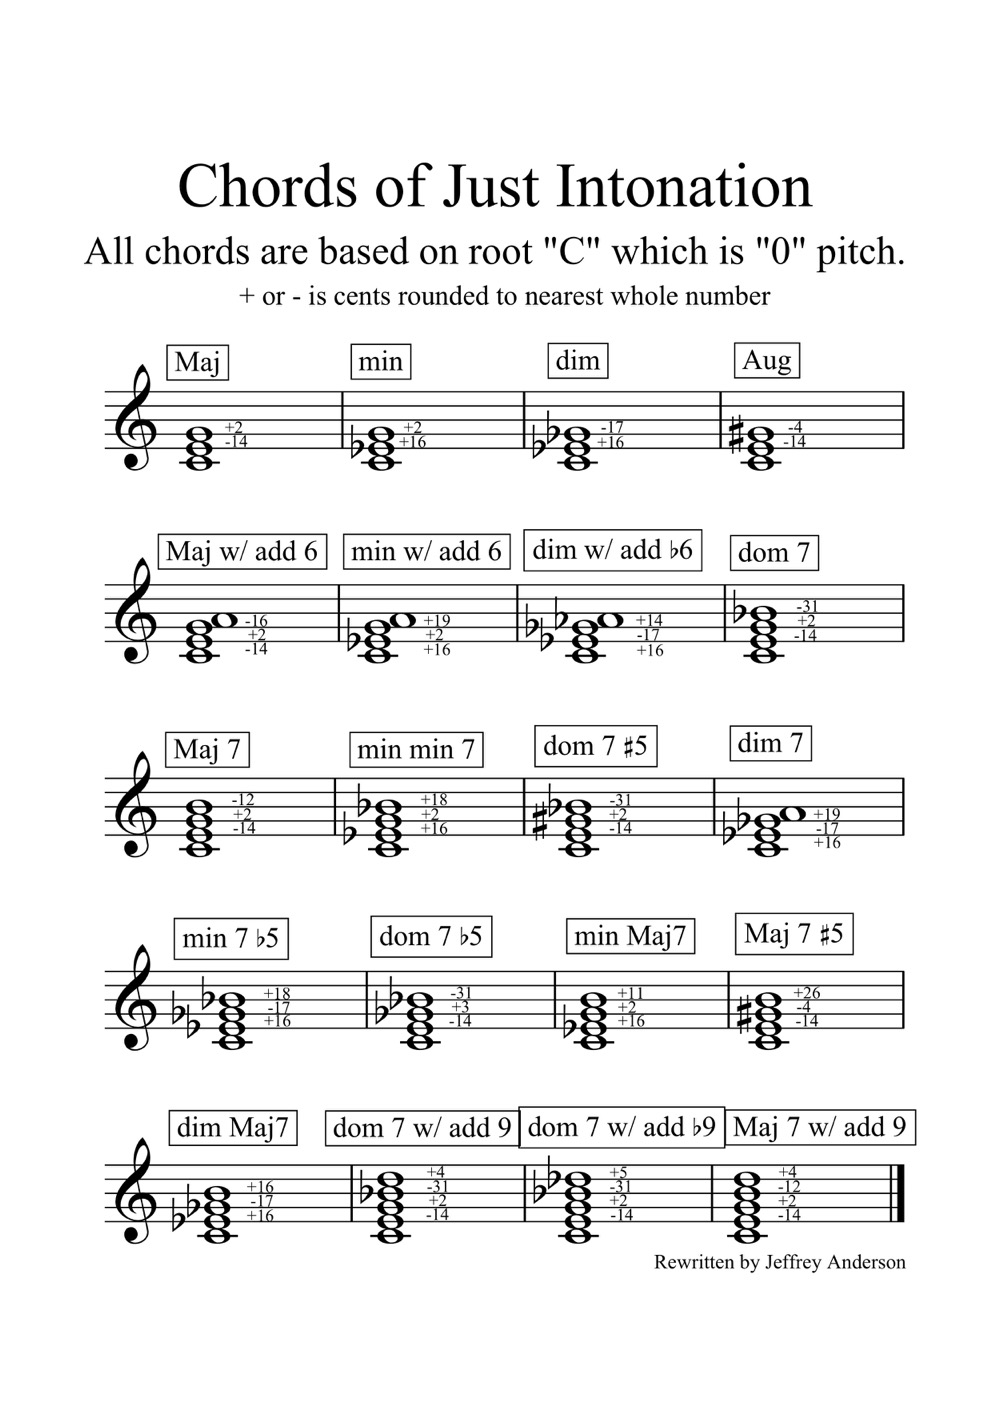 Chords of just intonation